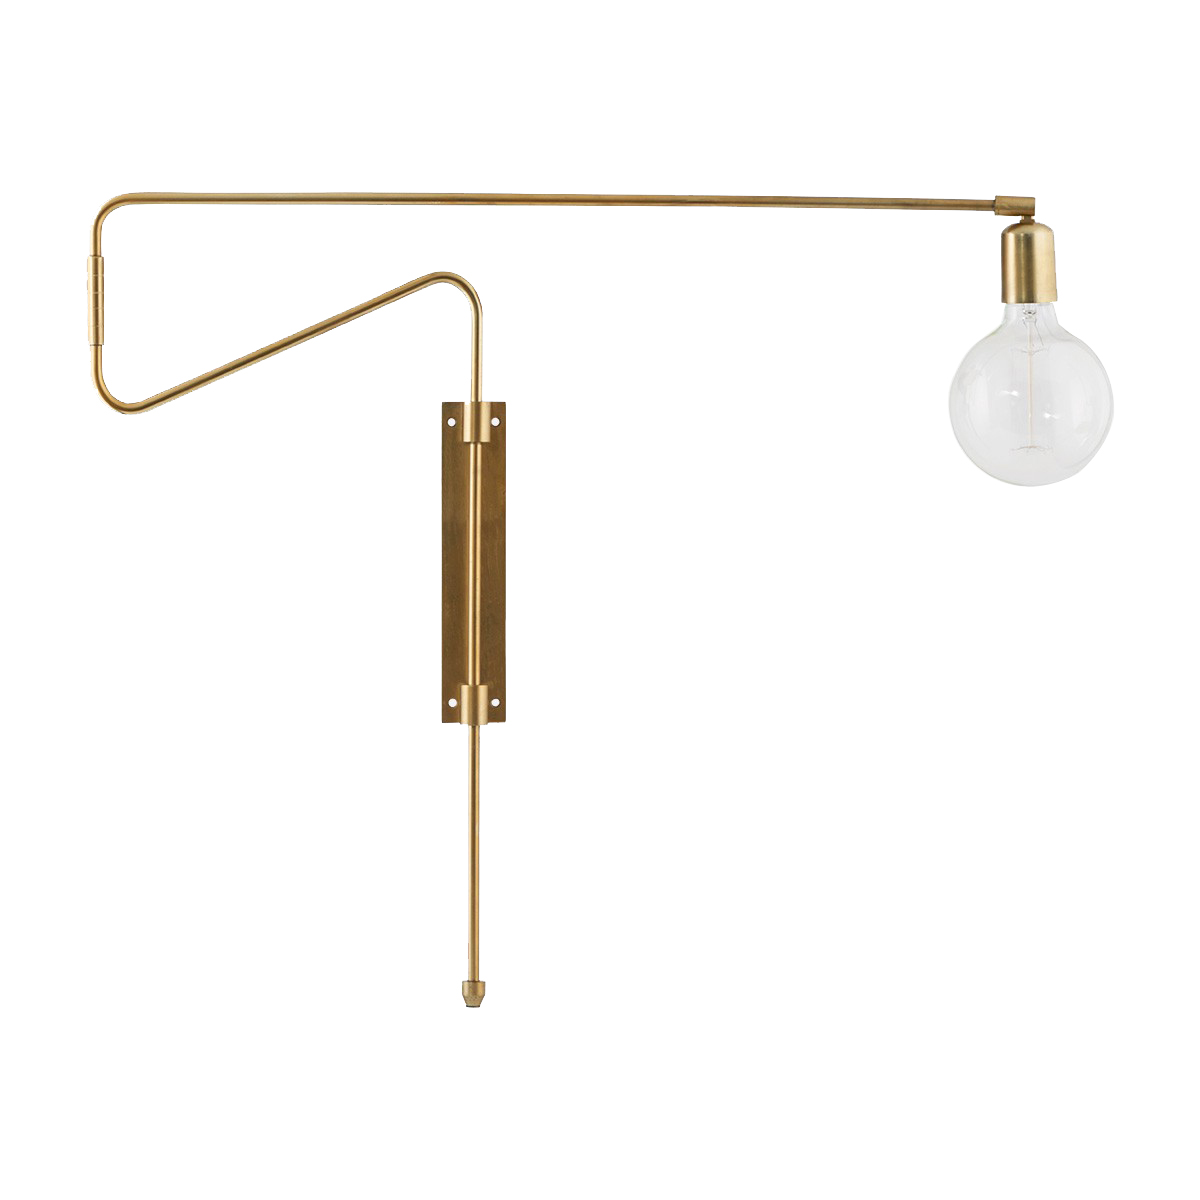 House Doctor - Swing Wall Lamp large - Brass (cb0213/203660213)